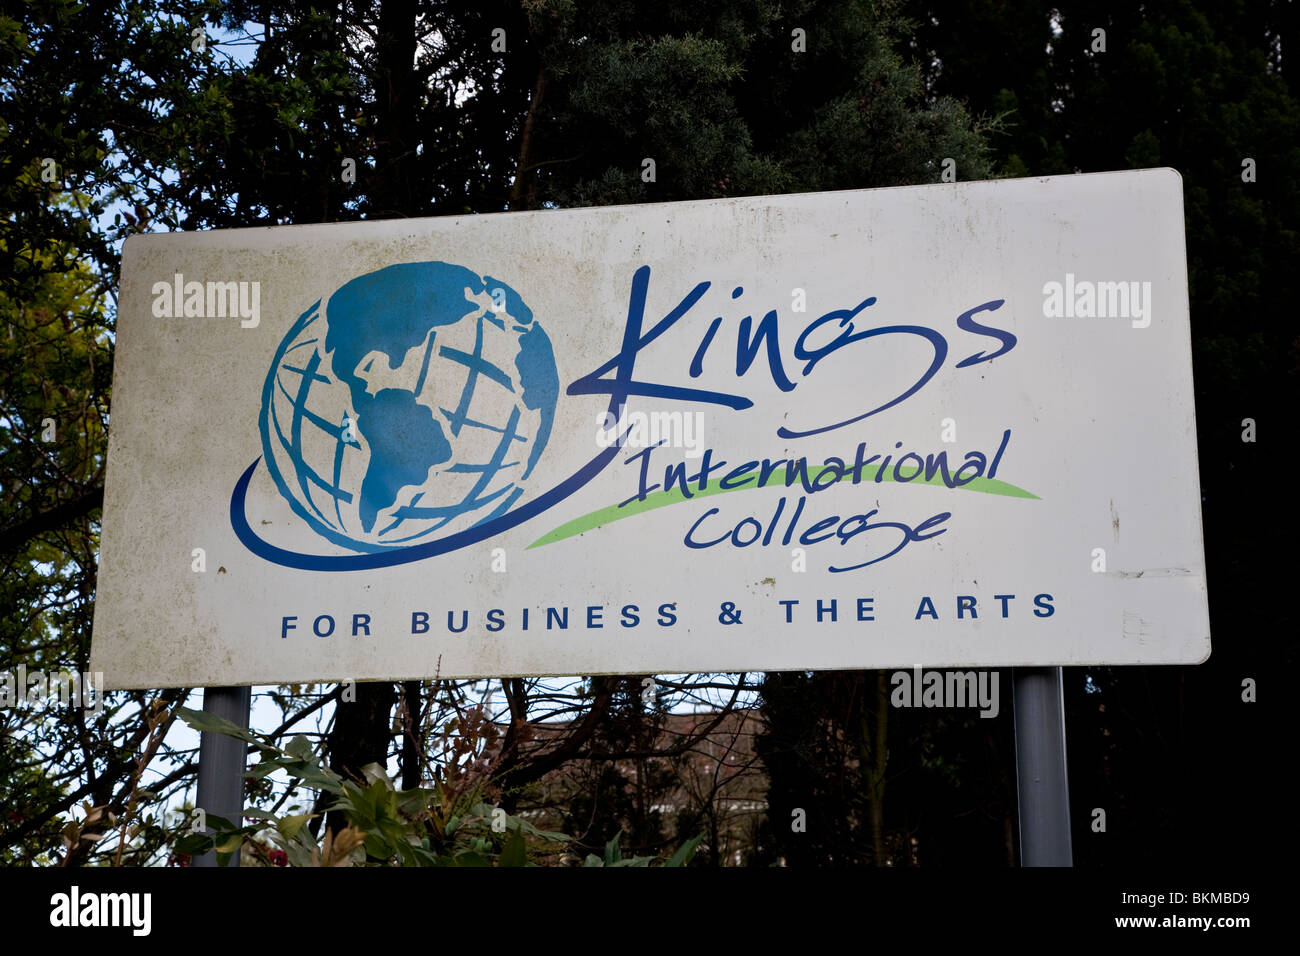 Kings International College, Camberley Banque D'Images